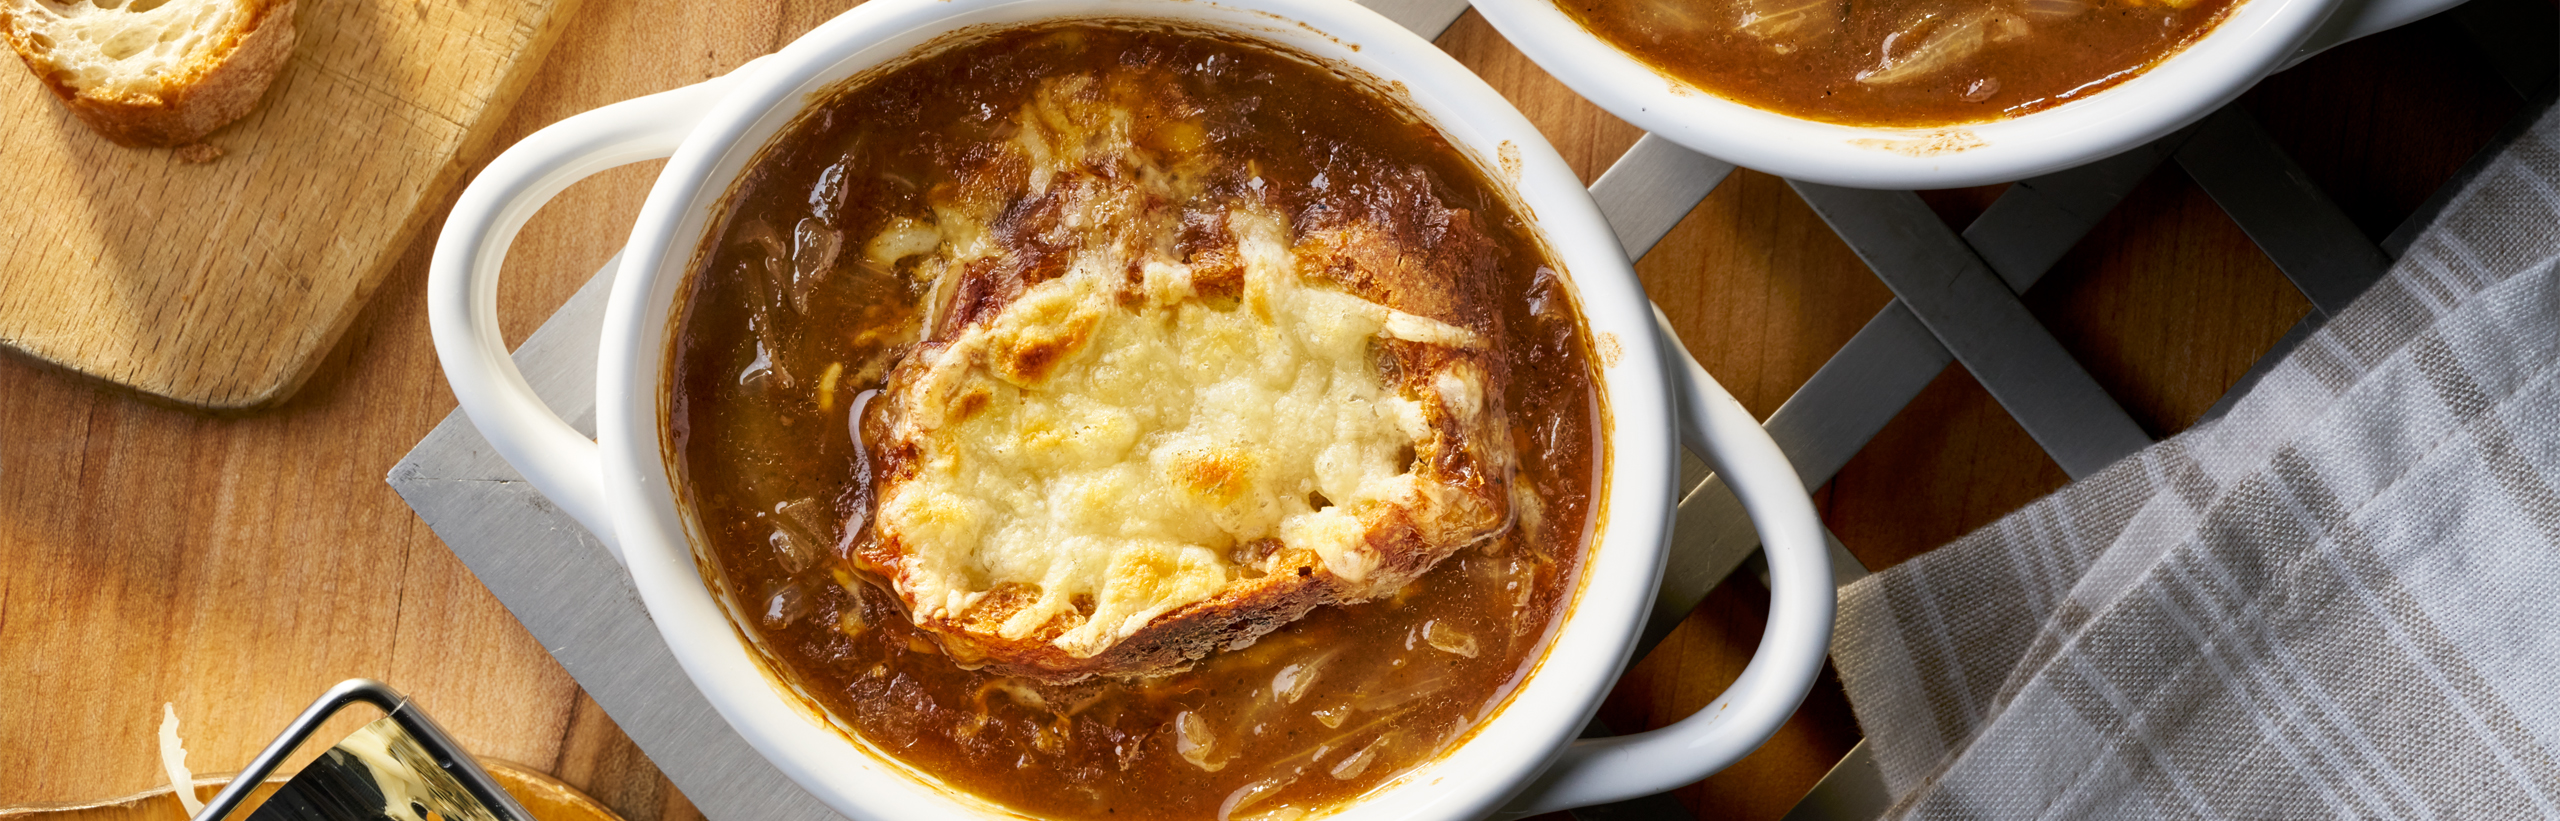 https://www.campbells.com/swanson/wp-content/uploads/2020/10/French-Onion-Soup.jpg